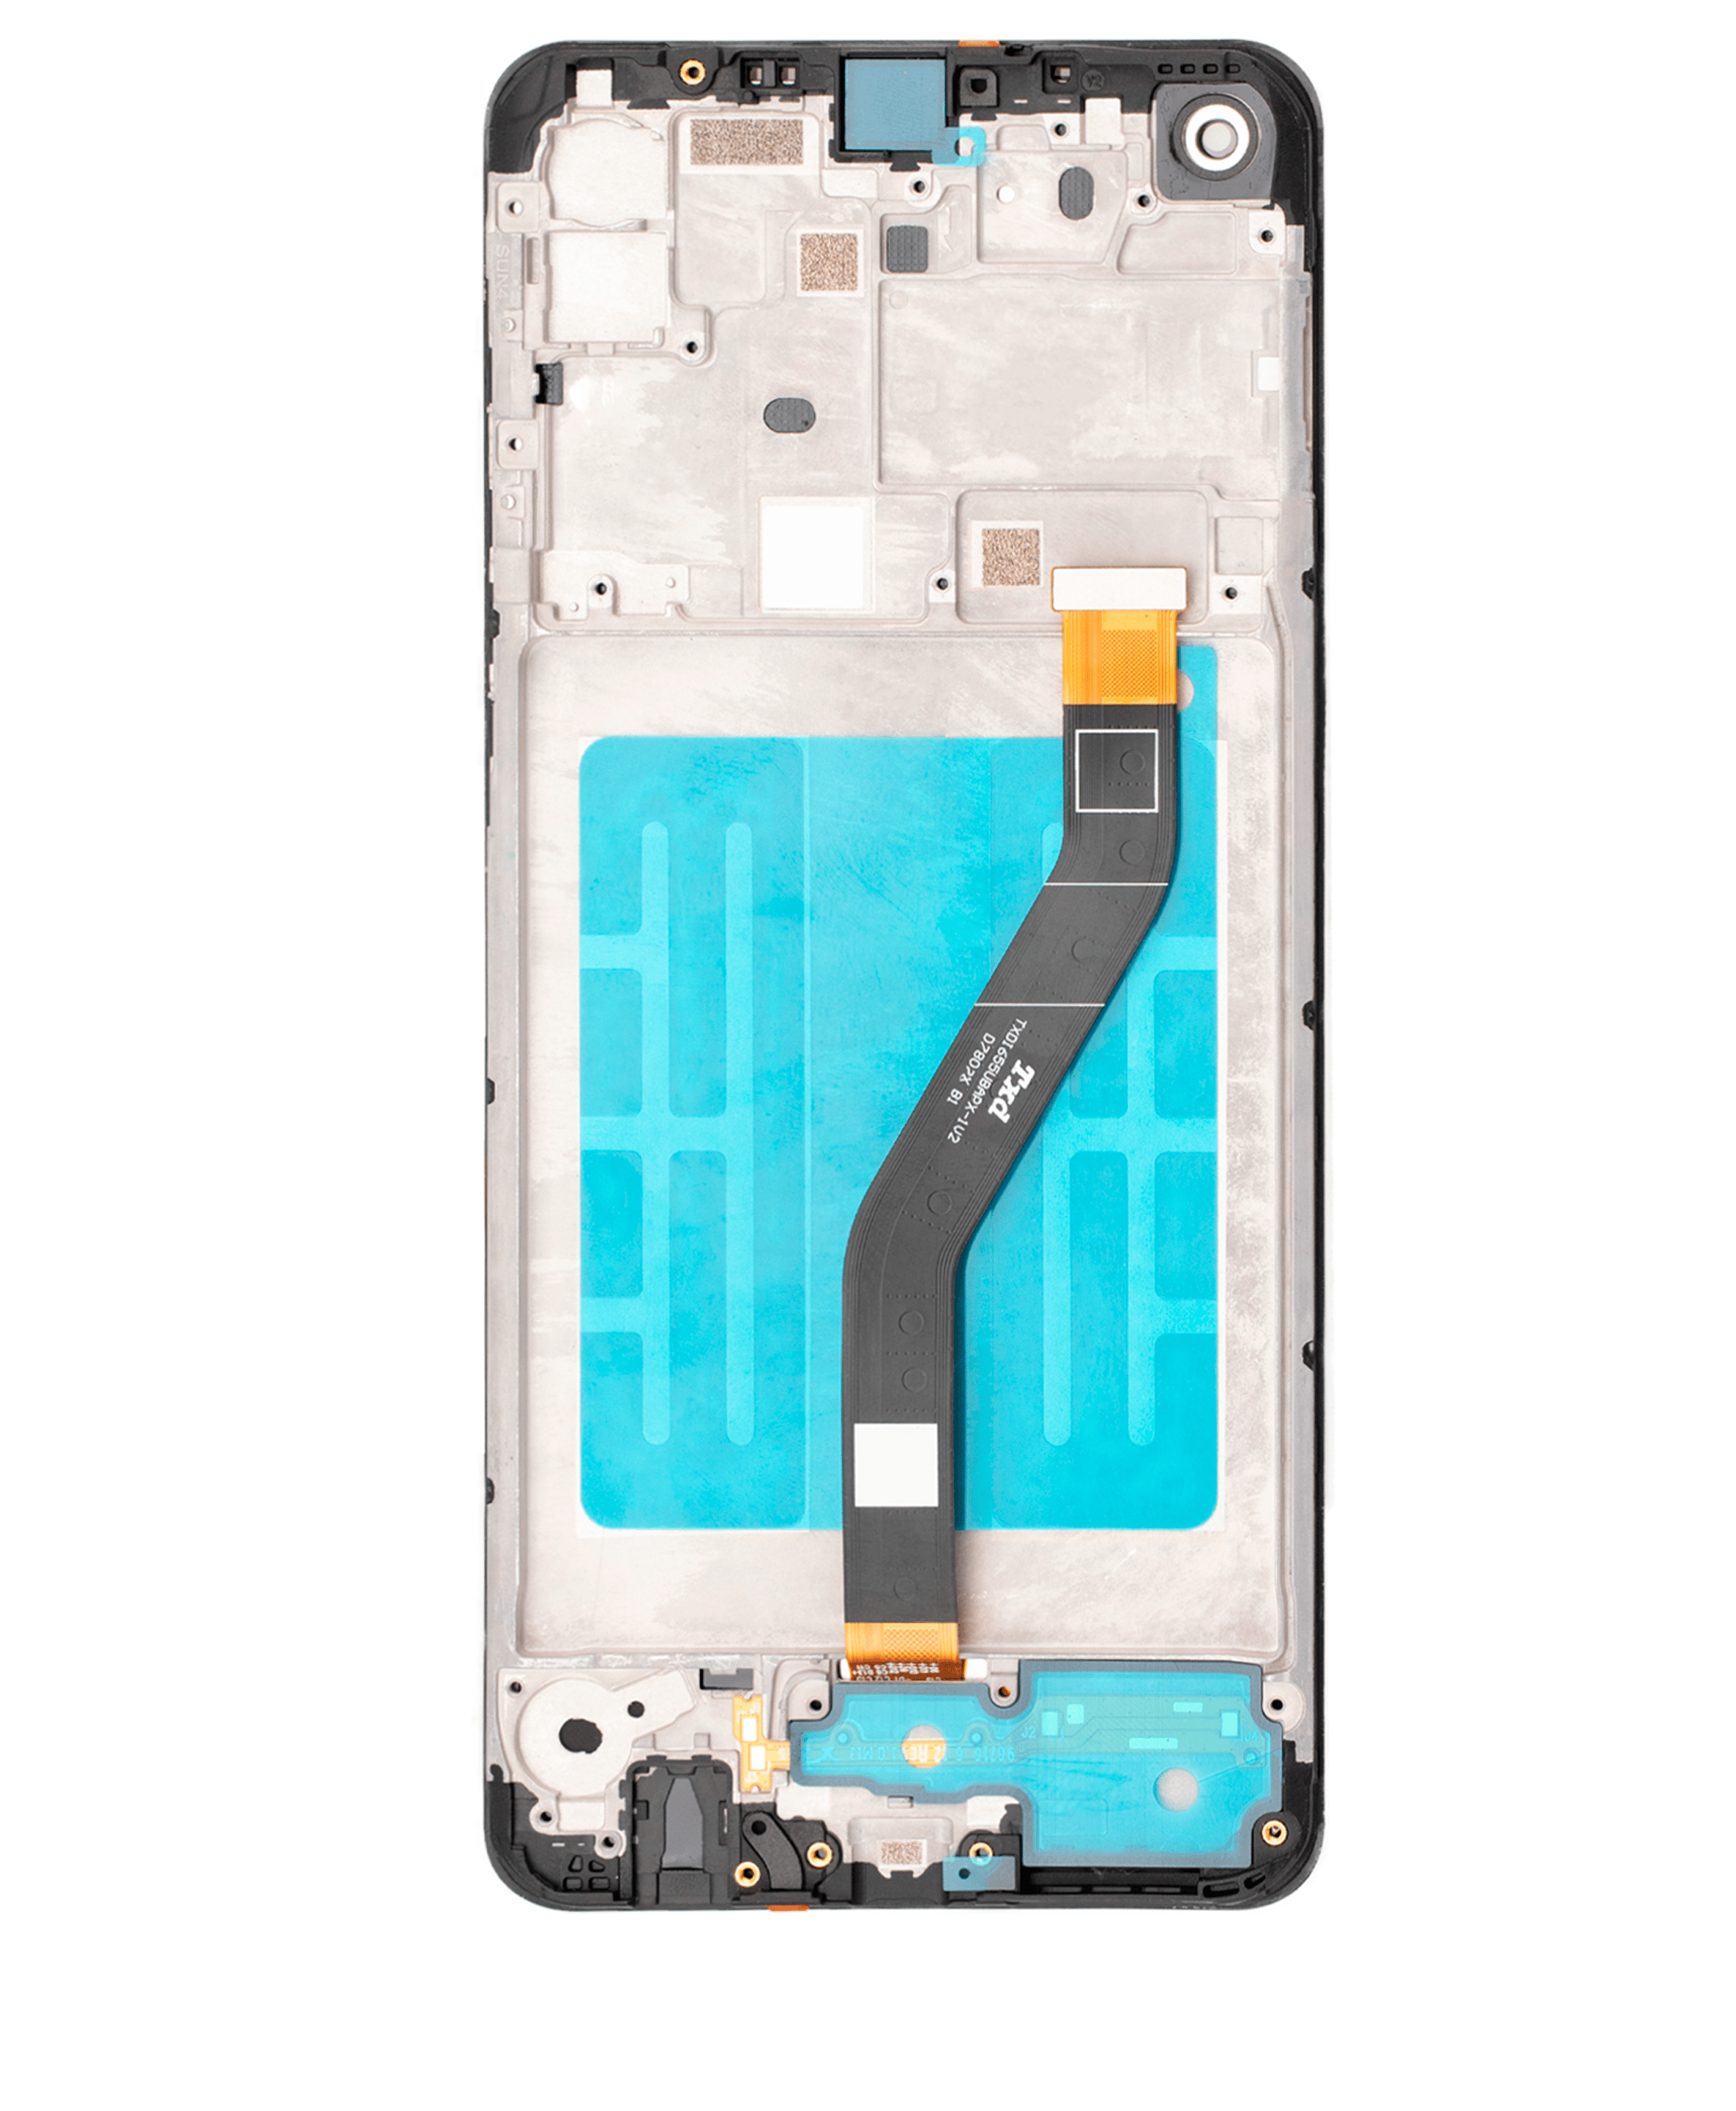 For Samsung Galaxy A21 (A215 / 2020) LCD Screen Replacement With Frame (Aftermarket Pro) (All Colors)